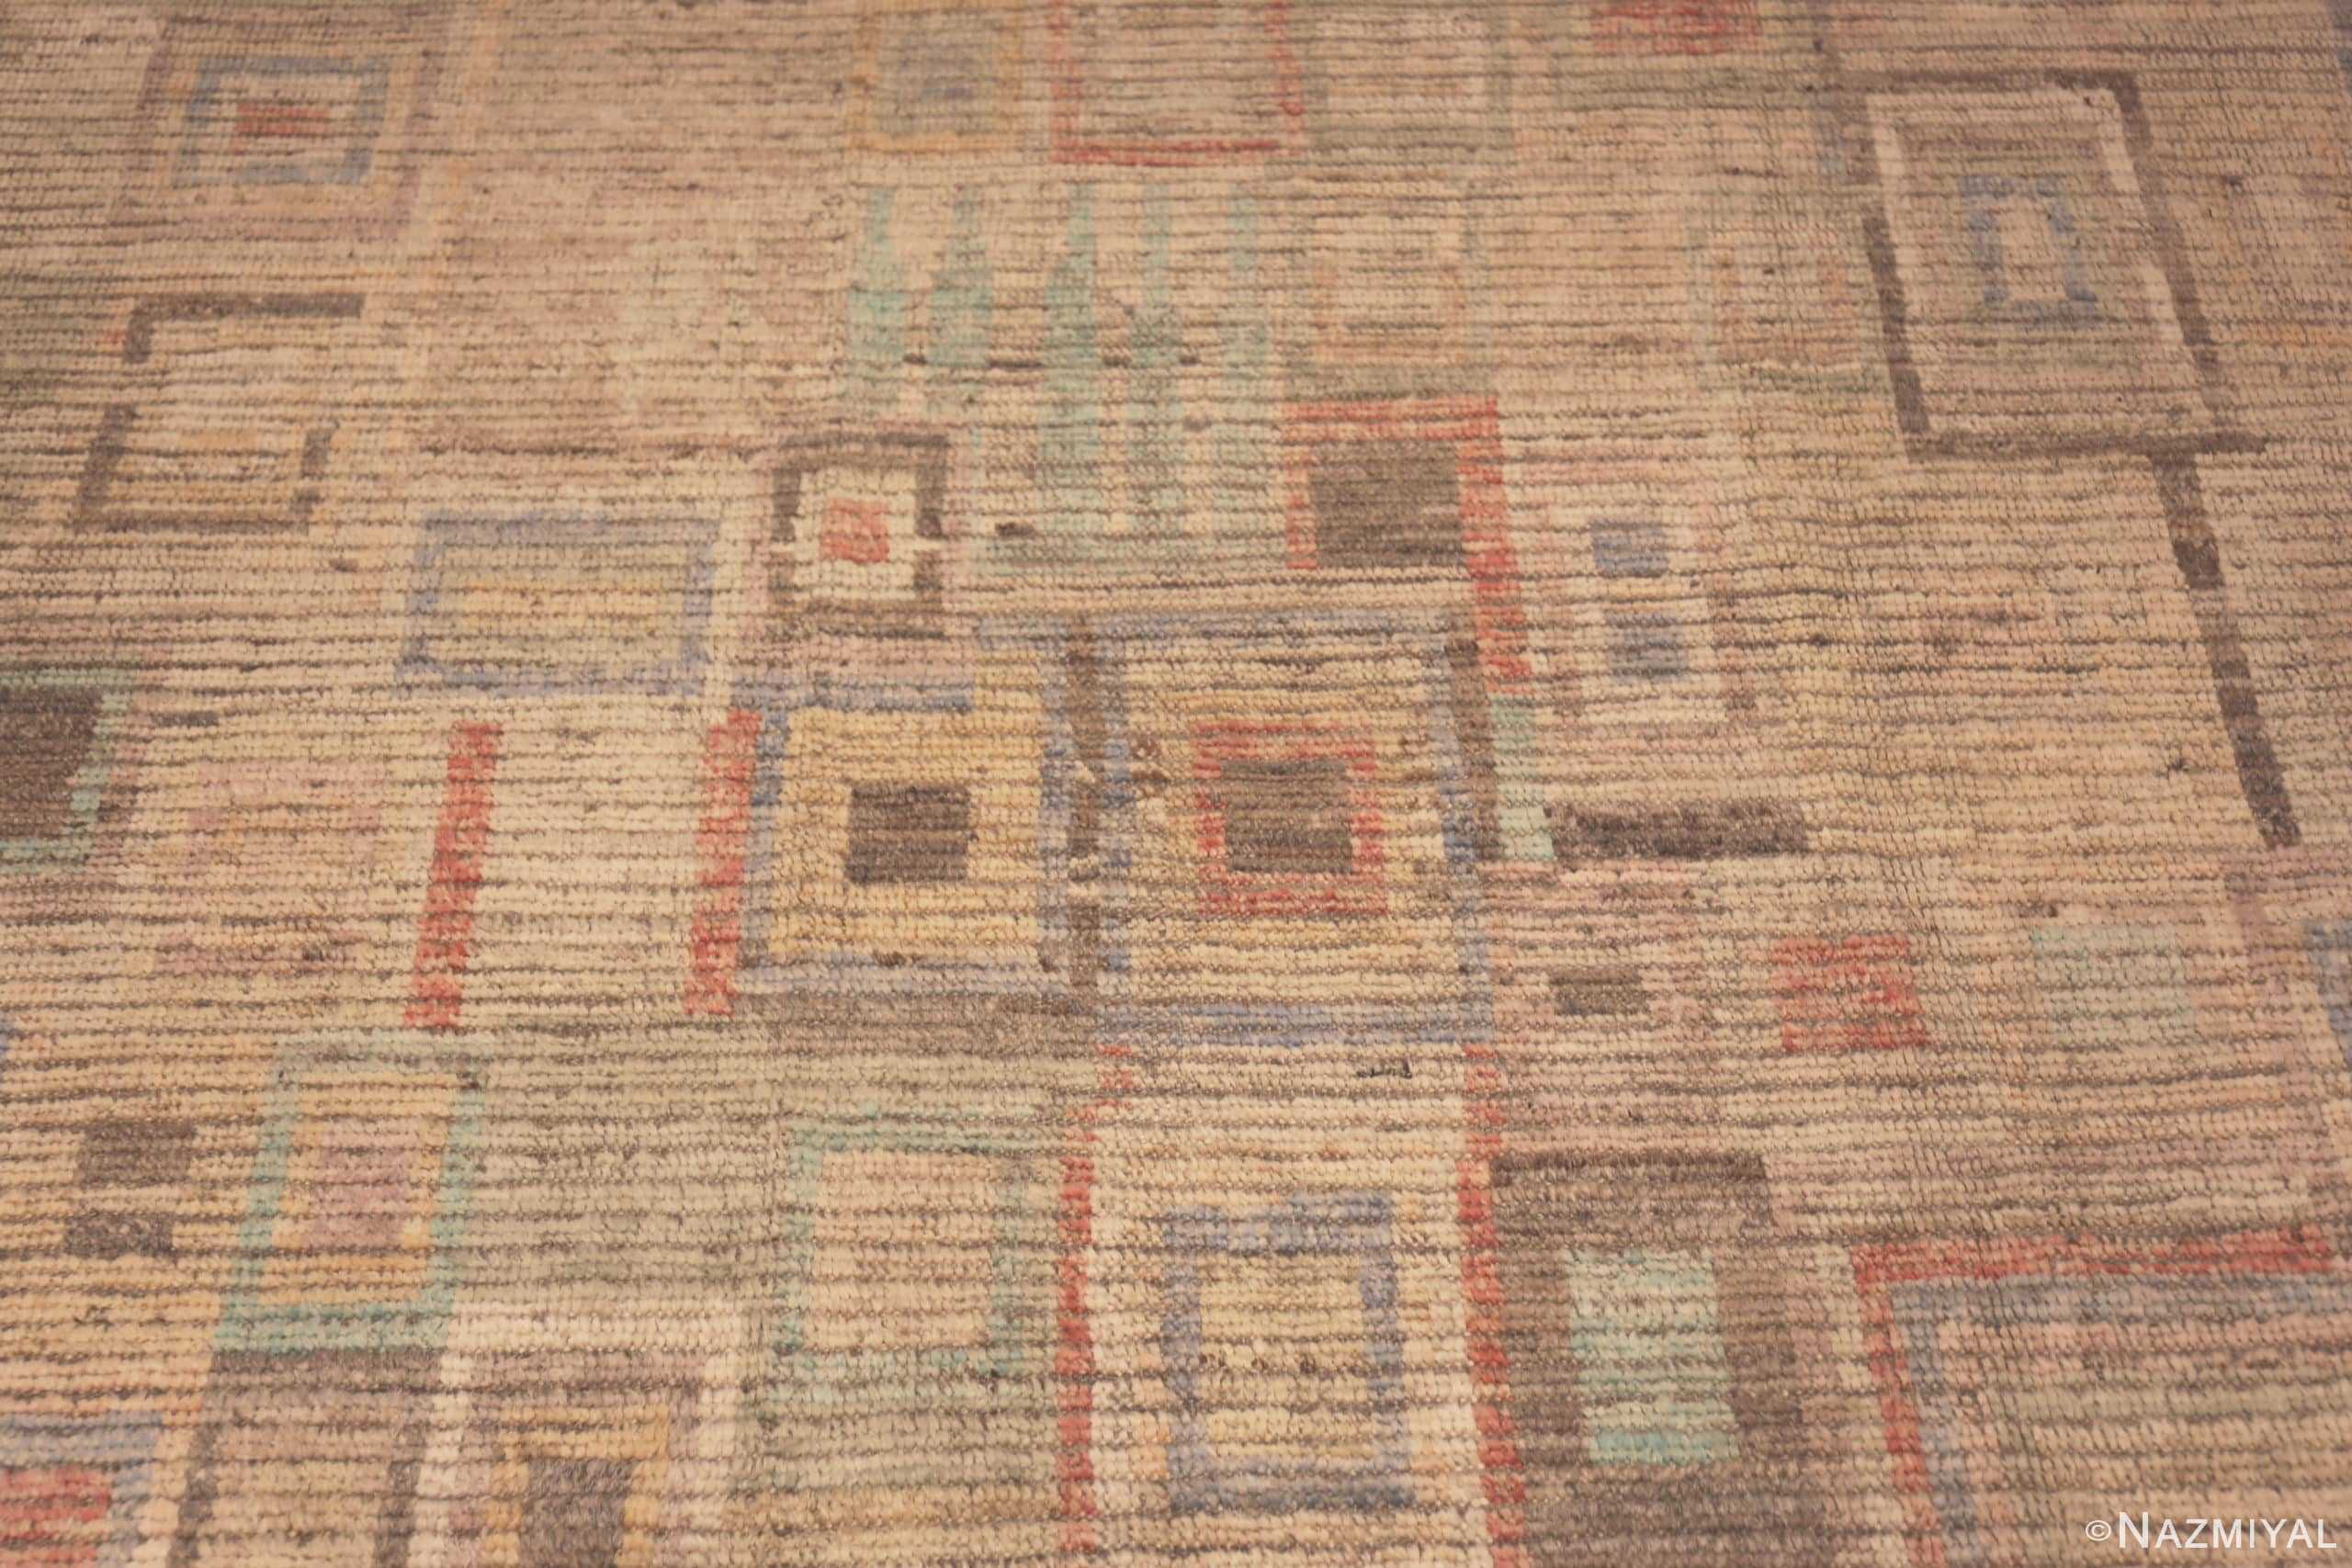 Detail Of Oversized Geometric Modern Moroccan Rug 61010 by Nazmiyal Antique Rugs